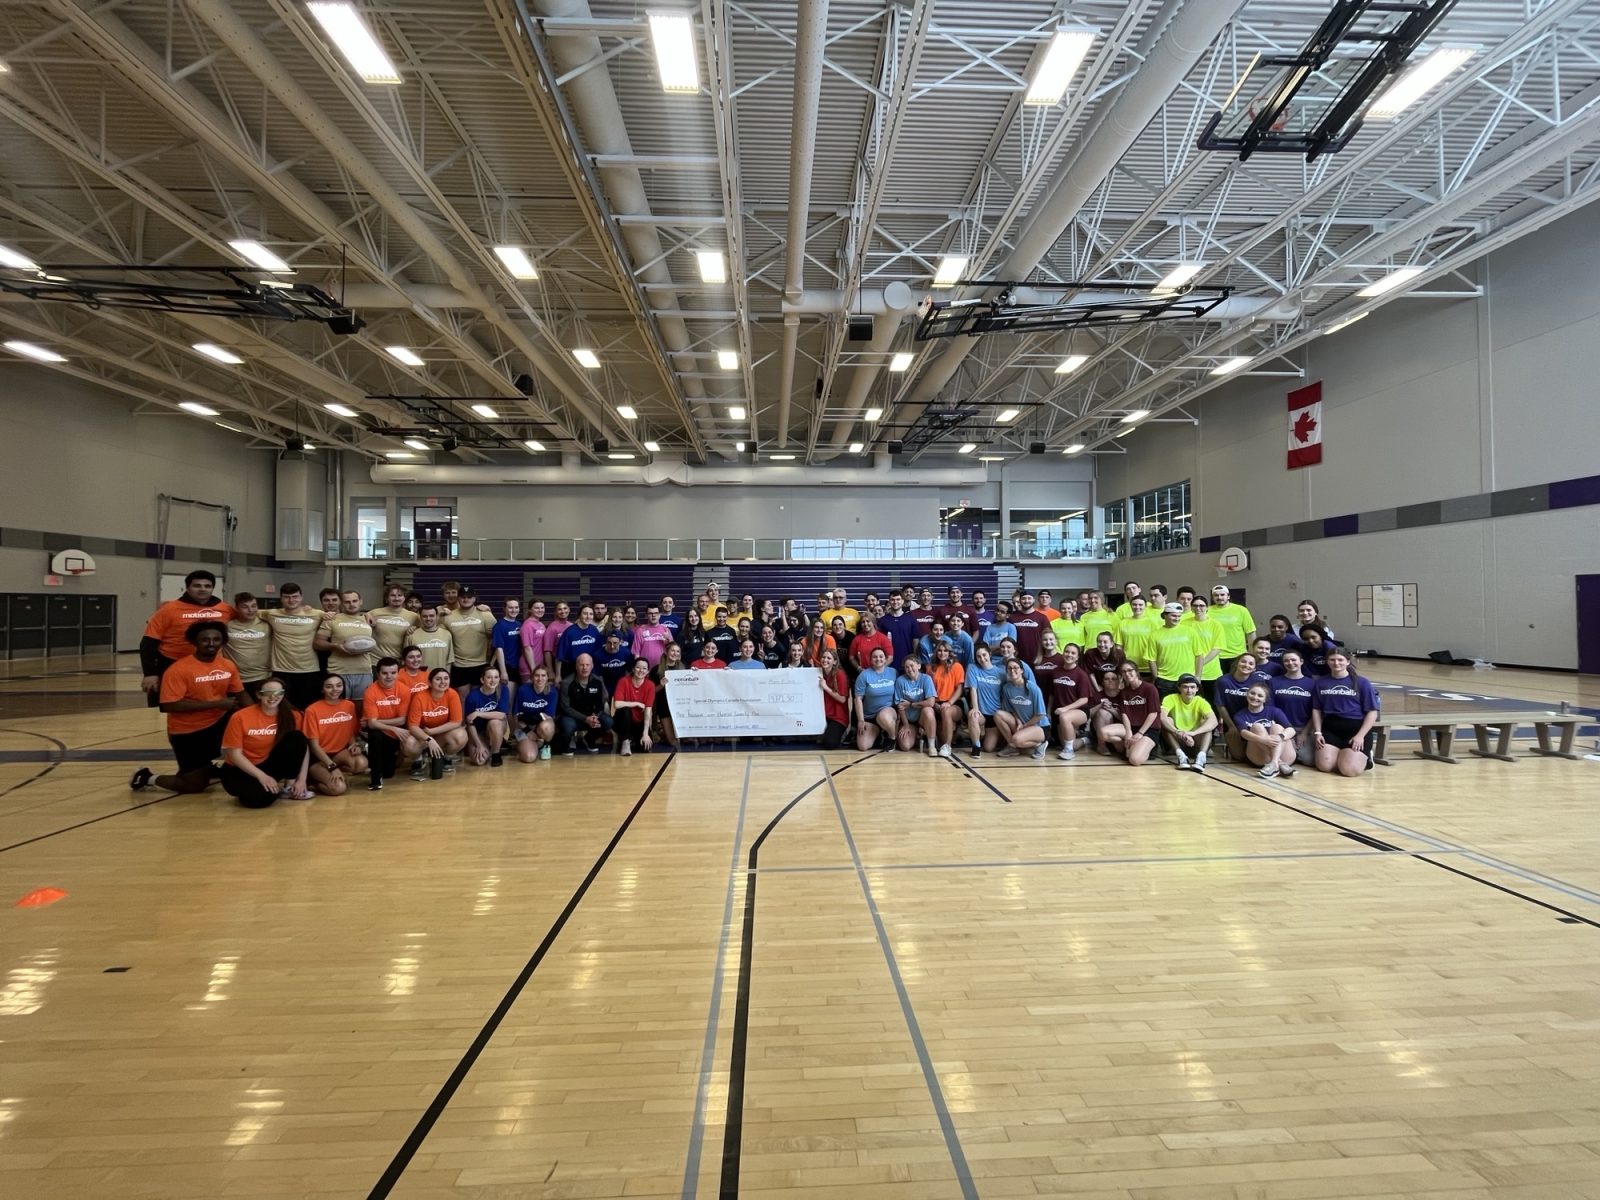 Annual fundraiser for Special Olympics held over the weekend at Bishop’s